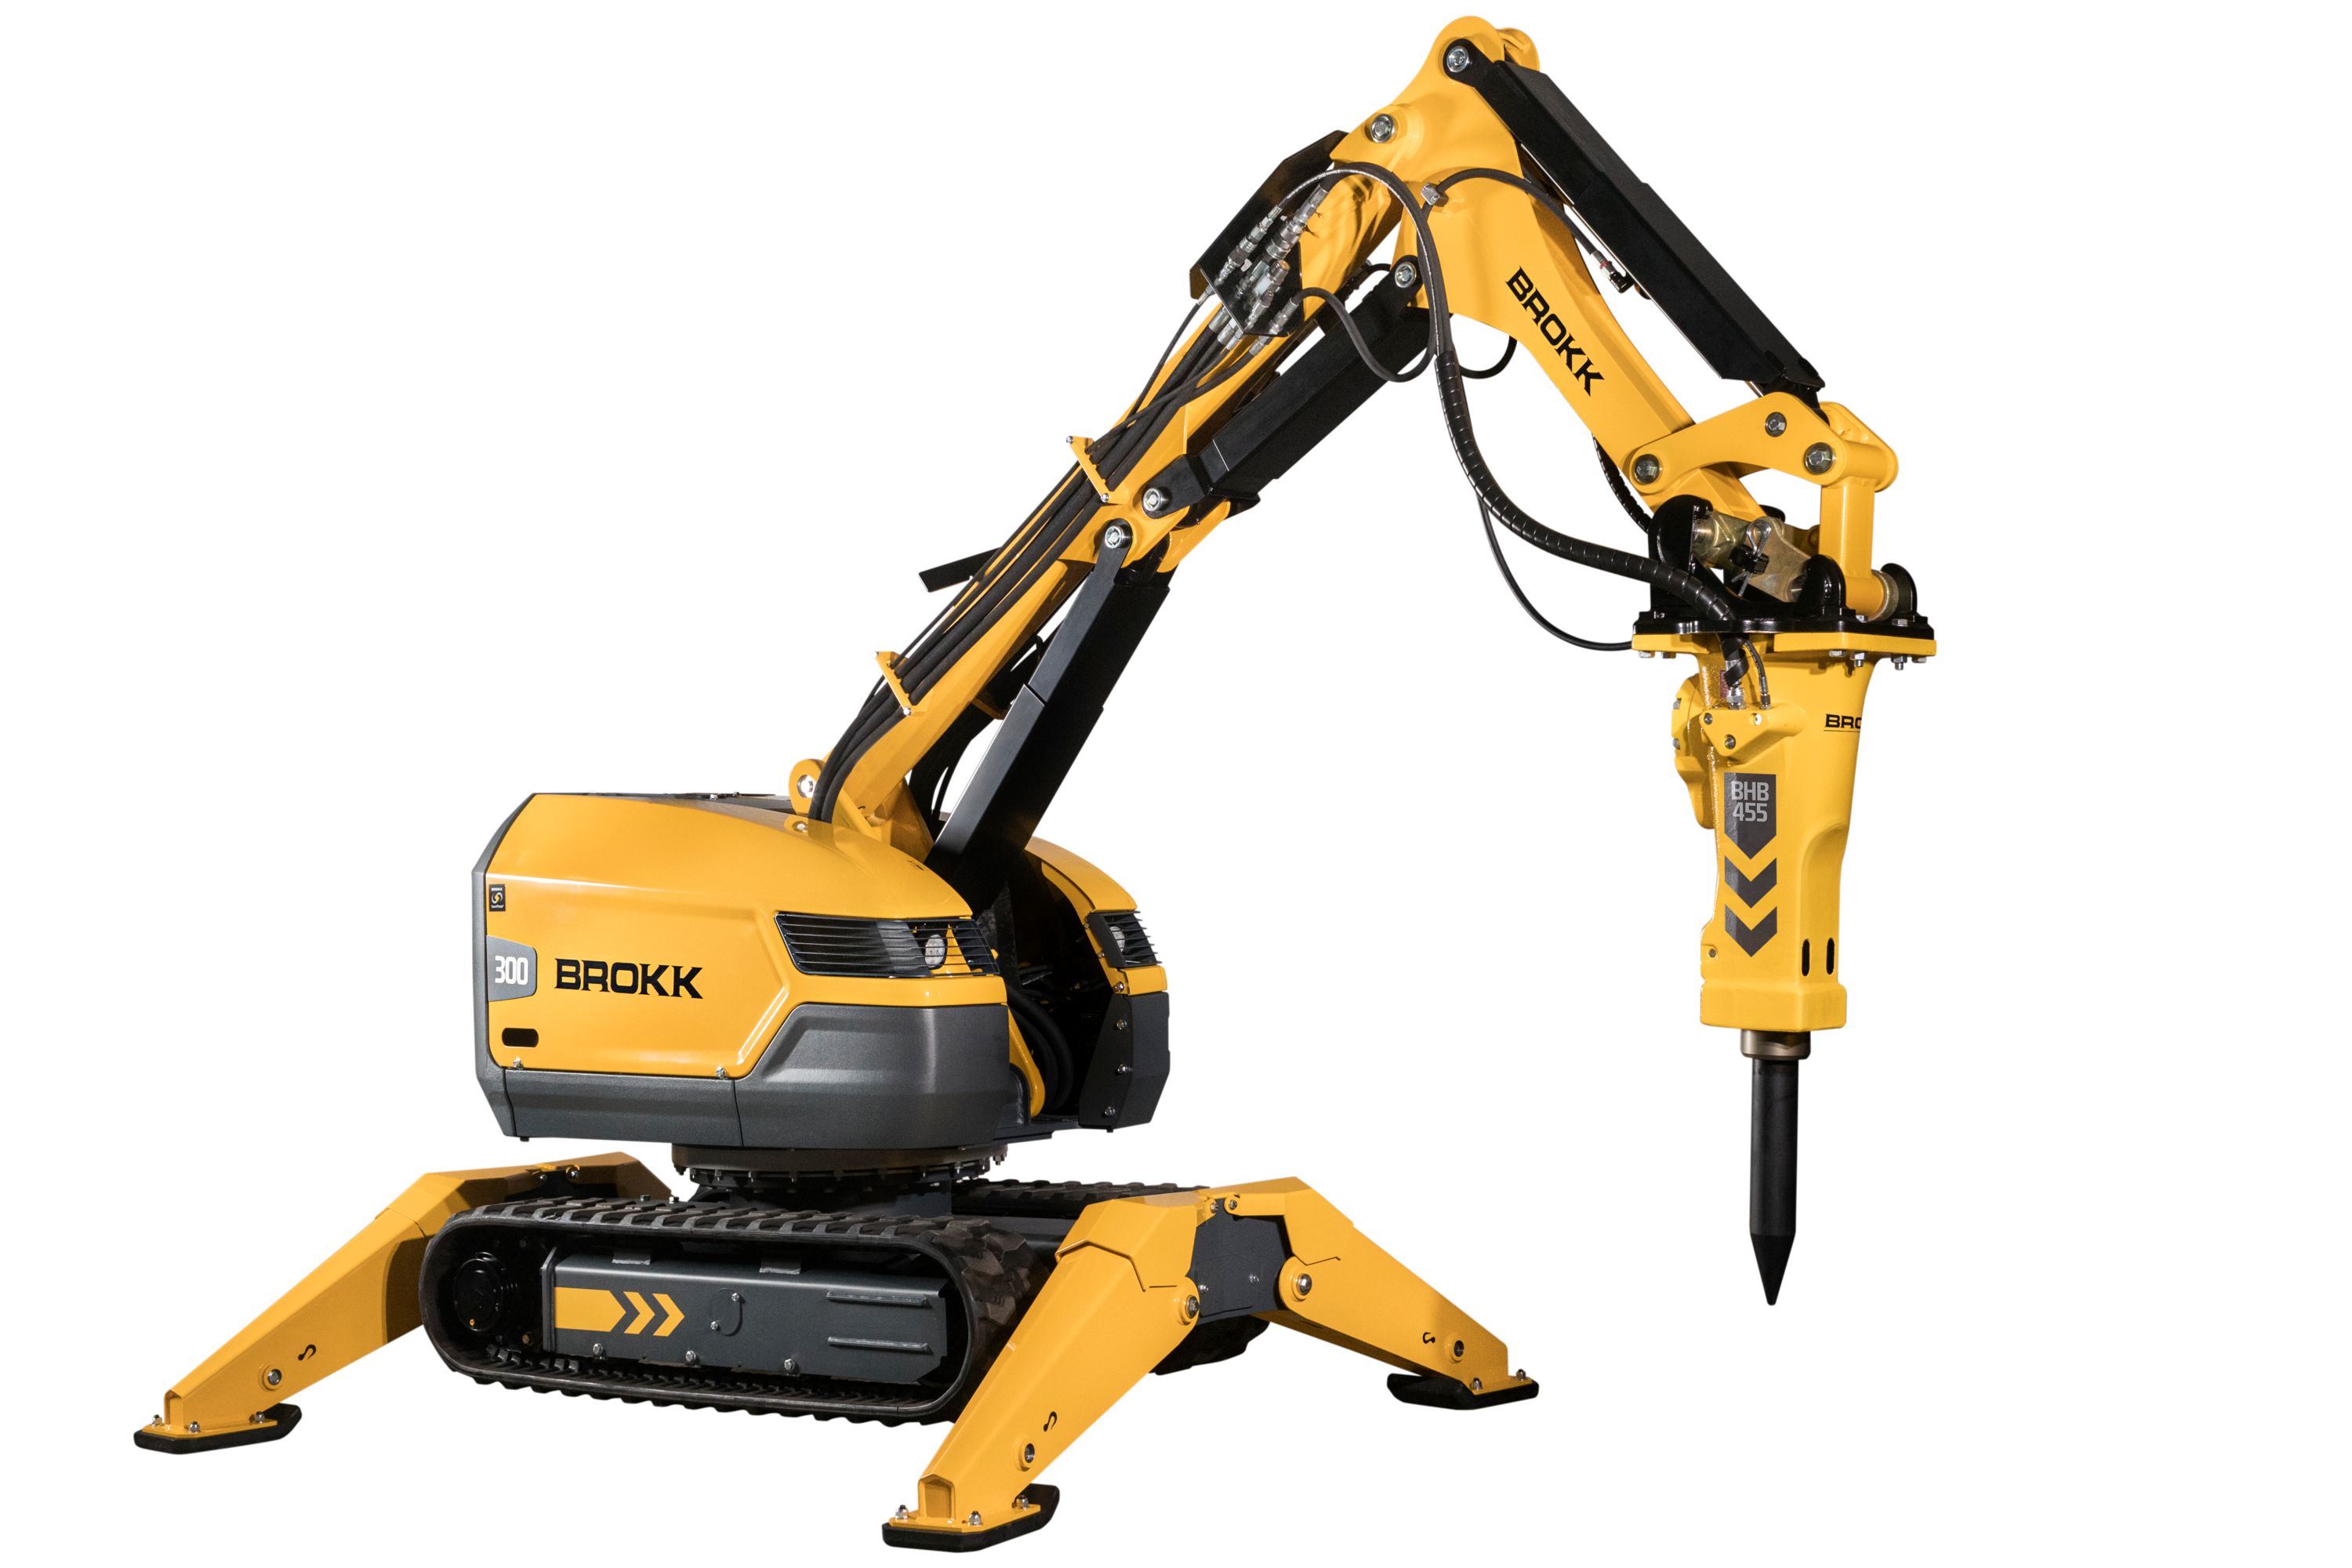 Brokk introduces the Brokk 300, which features 40 percent more demolition power than its predecessor and incorporates new SmartConcept technological features.